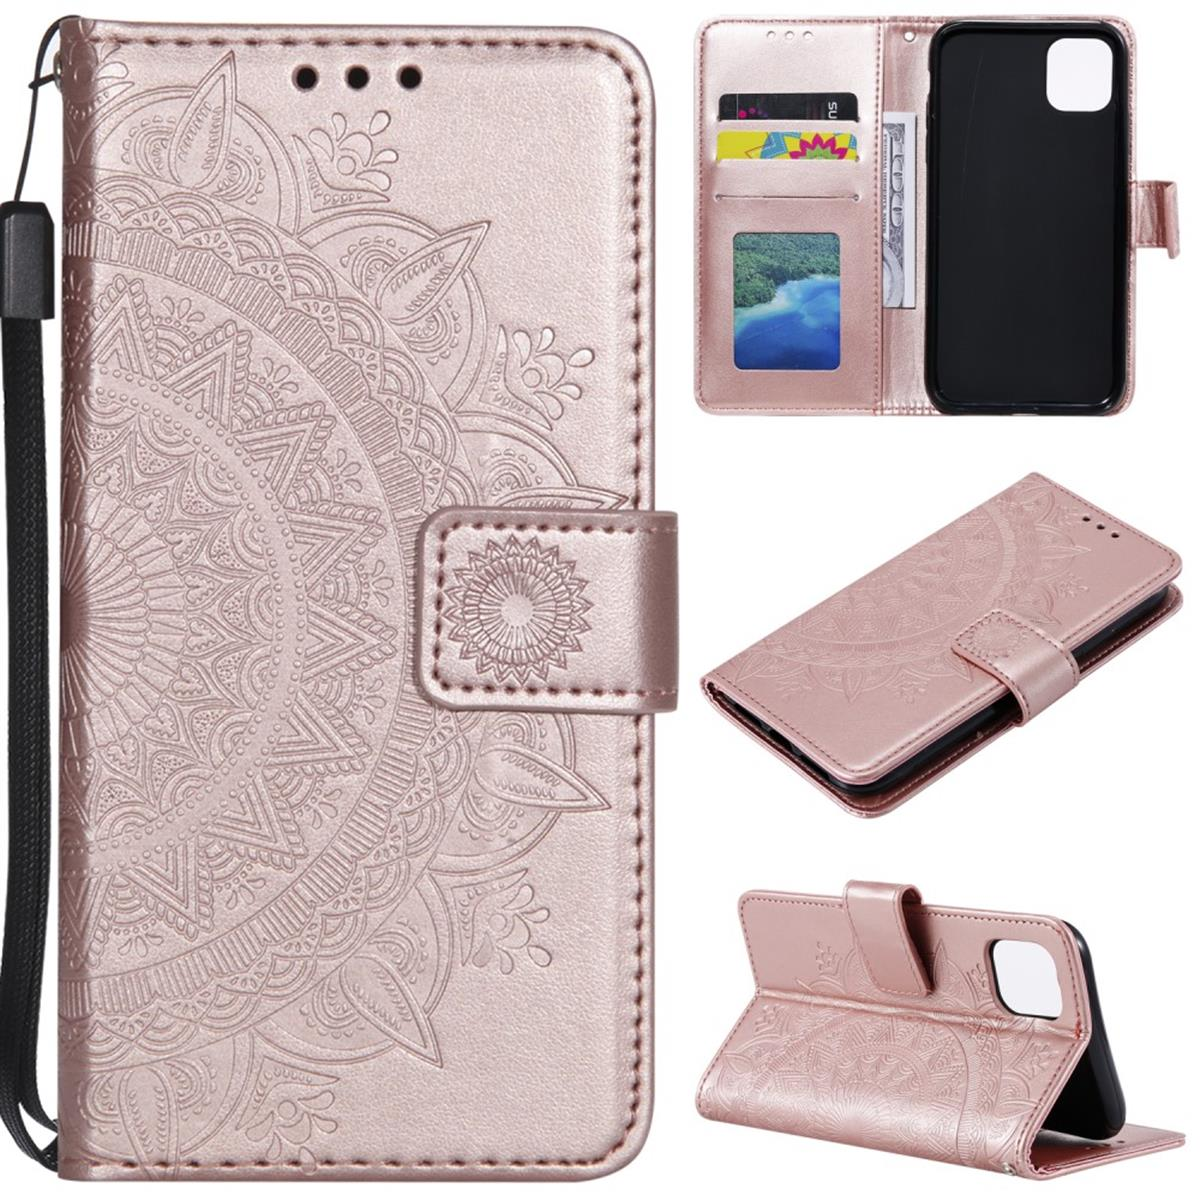 COVERKINGZ Klapphülle mit 5G, Roségold Samsung, Bookcover, Mandala A22 Muster, Galaxy